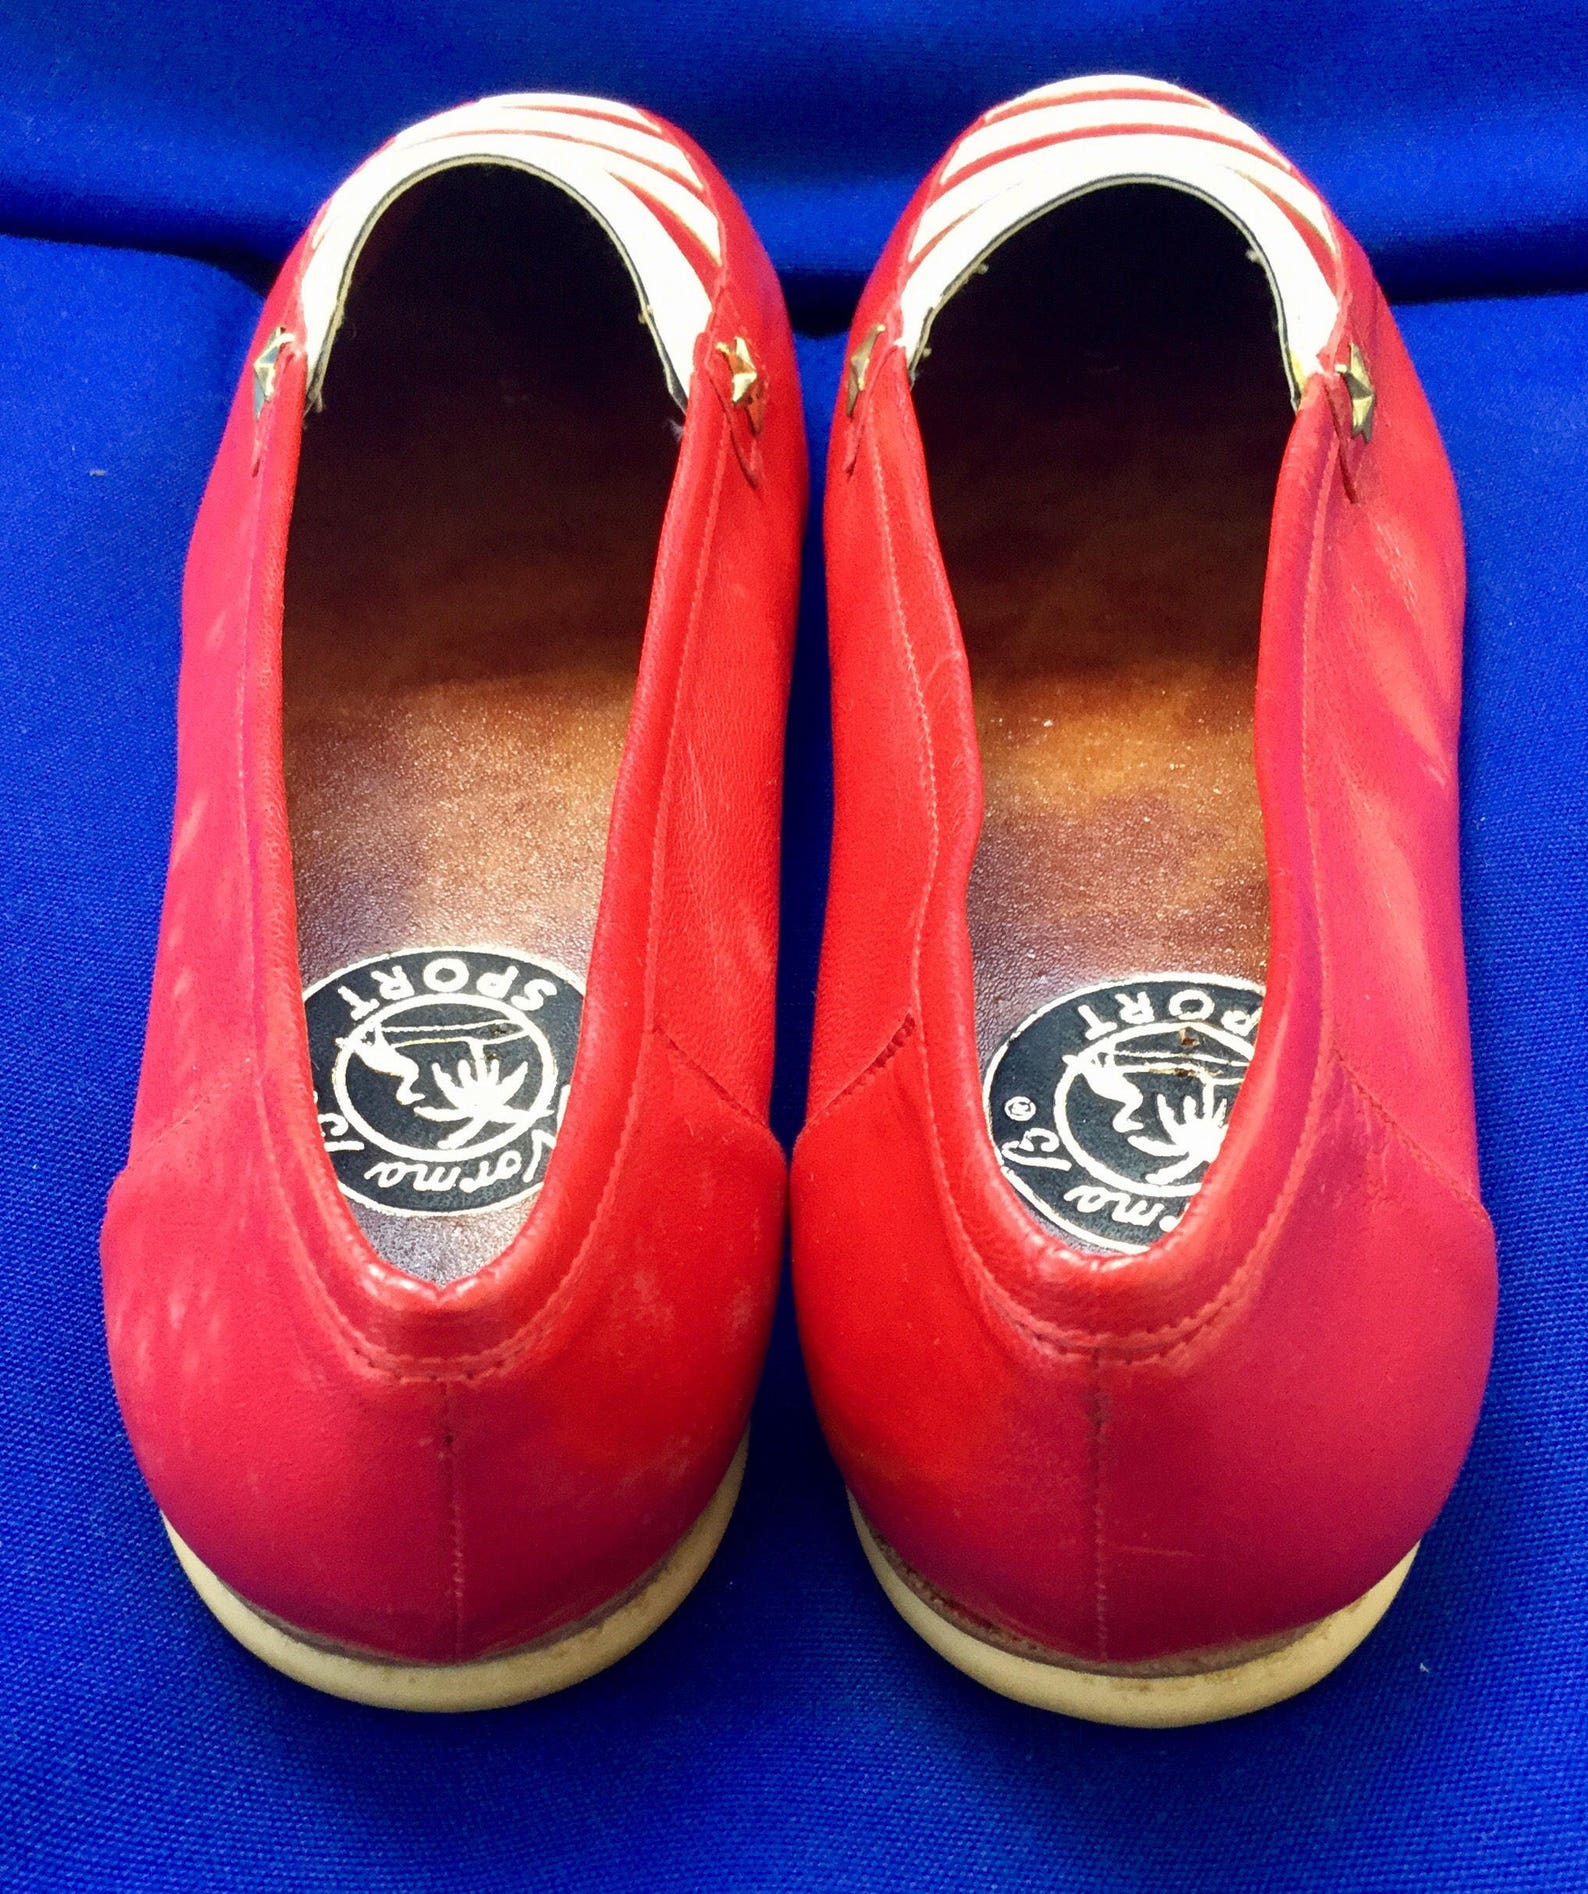 cool vintage norma b sport nautical stripes white/red leather square toe ballet/flats (reduced)